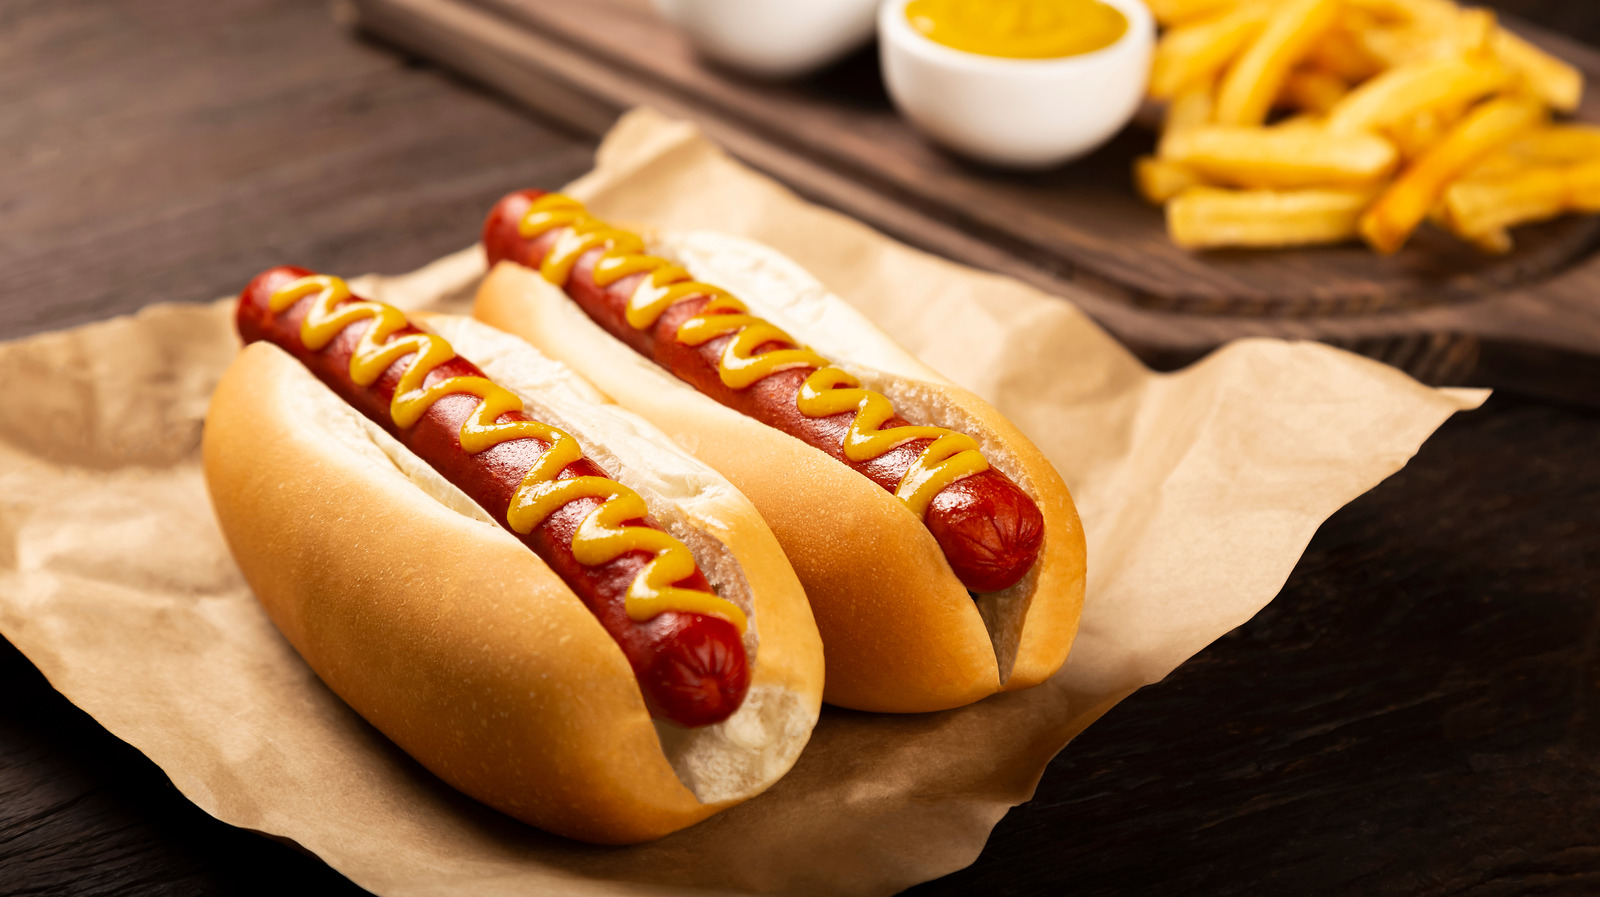 The Reason You Should Never Make Your Own Hot Dogs